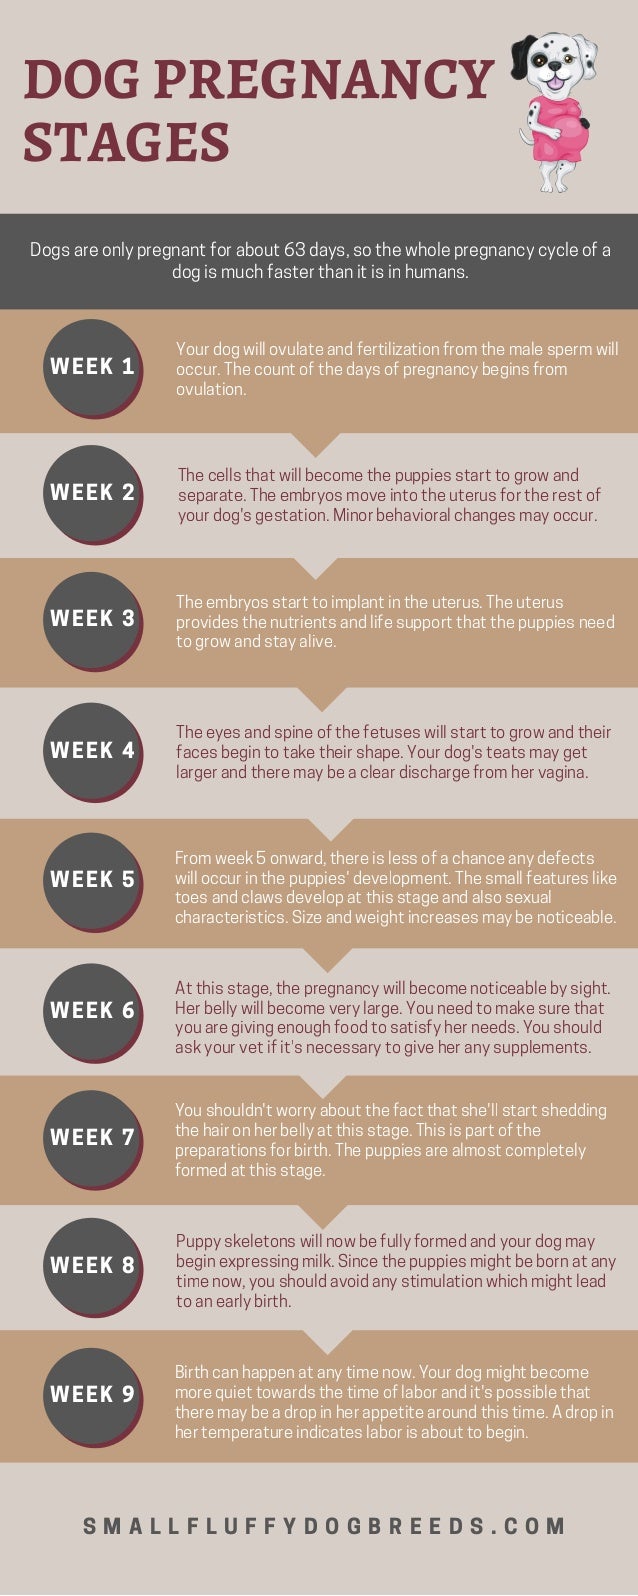 Dog Pregnancy By Week 35 Images Pregnancy Week By Week Images 2019 Pregnancy Symptoms Stages My Pet Needs That Crittersitca For Pets